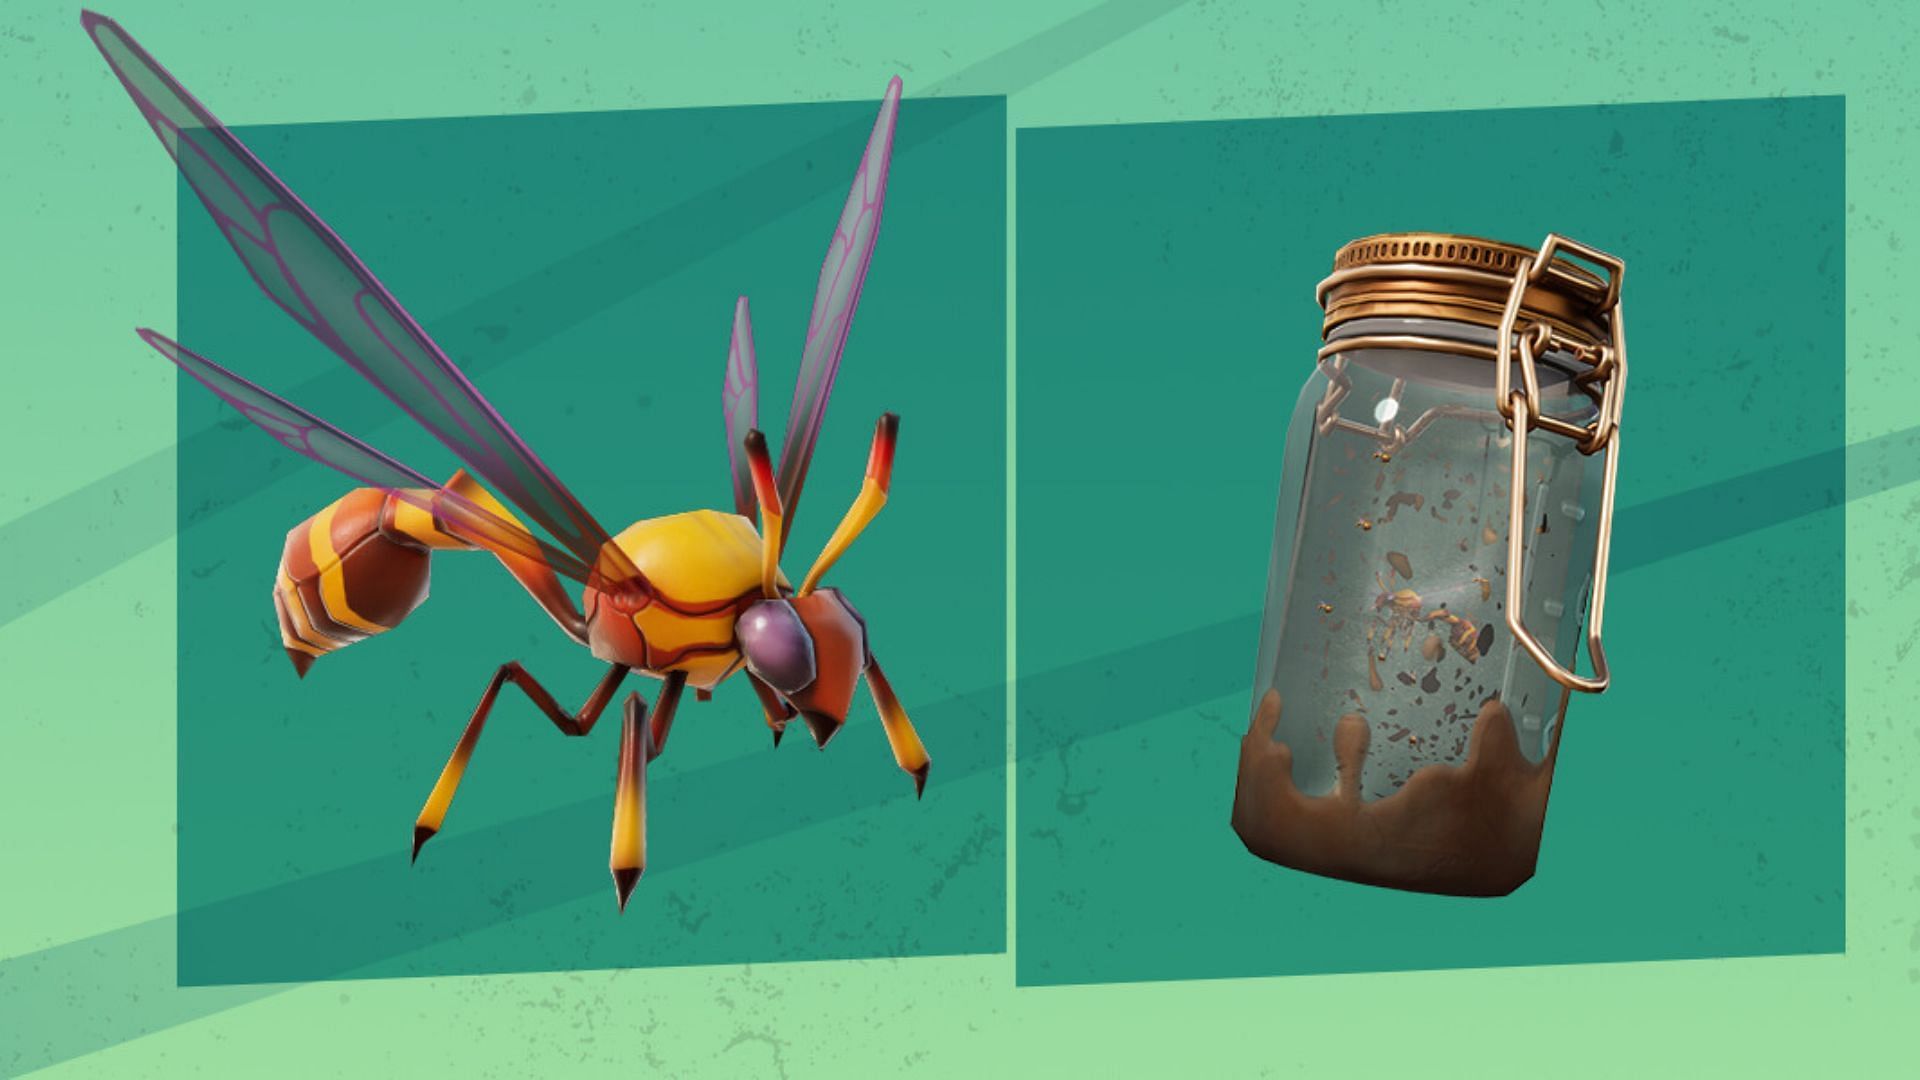 New wild wasps in Fortnite (Image via Epic Games)